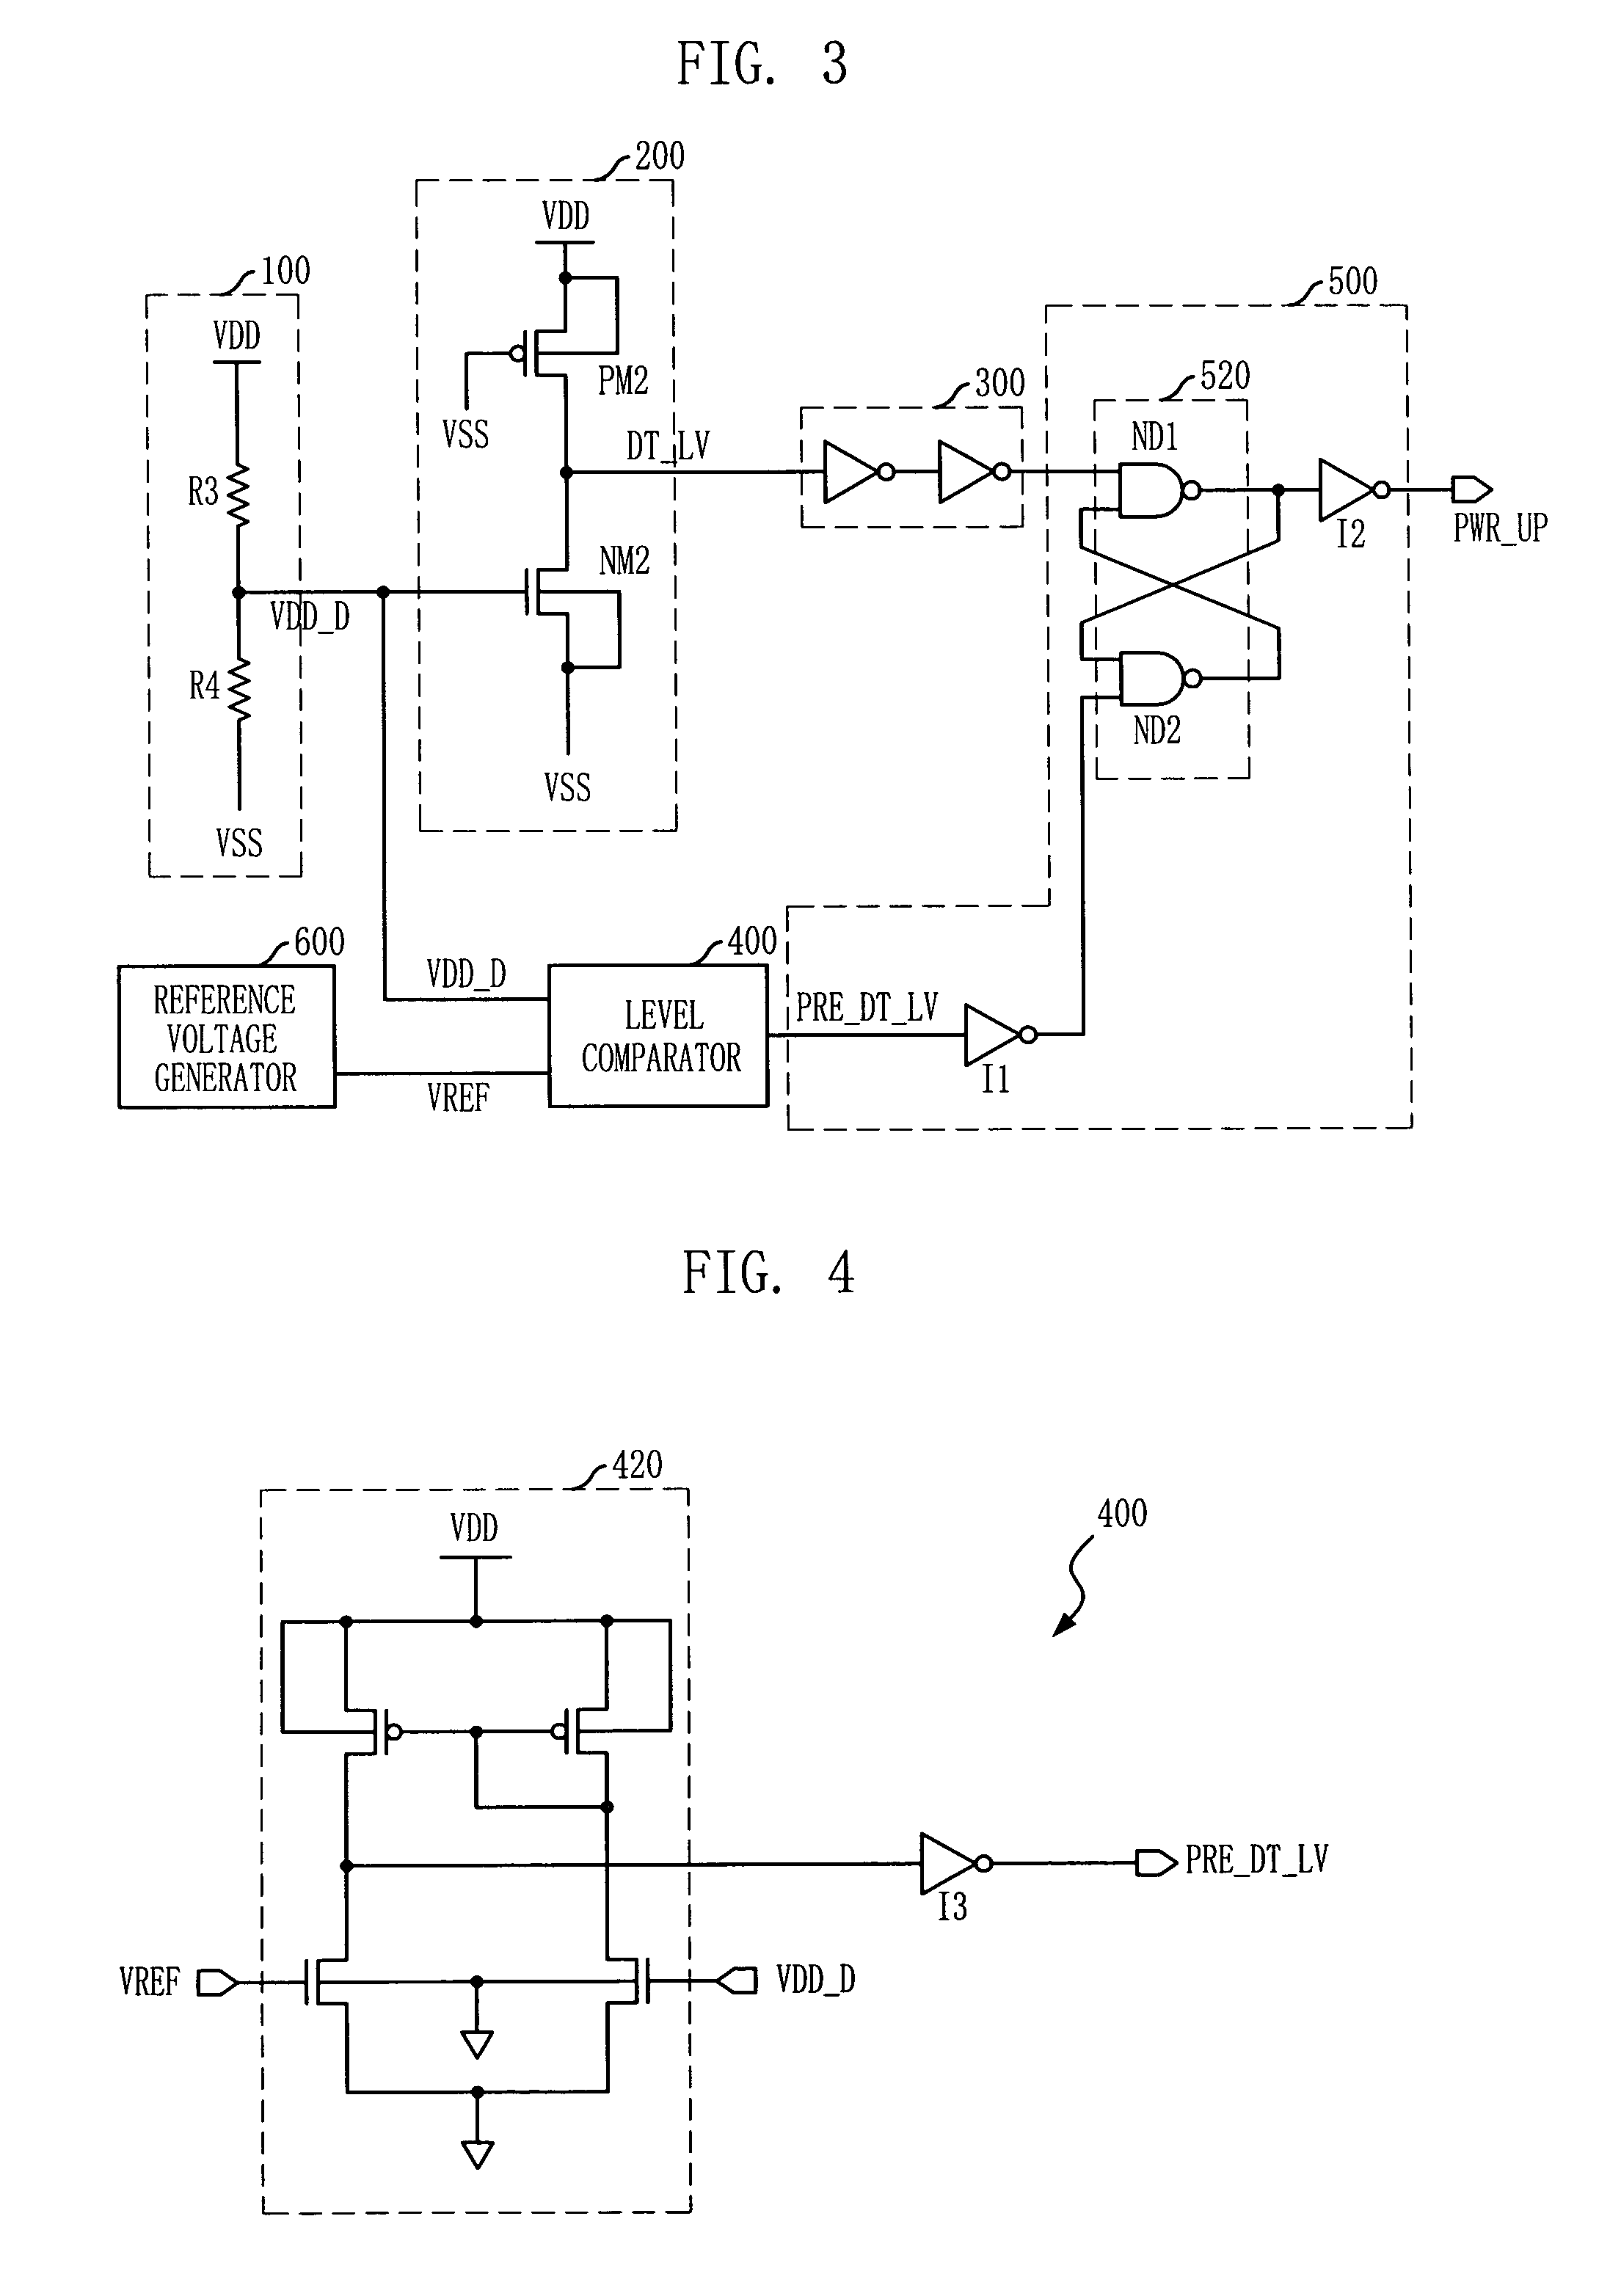 Power-up signal generating circuit and method for driving the same